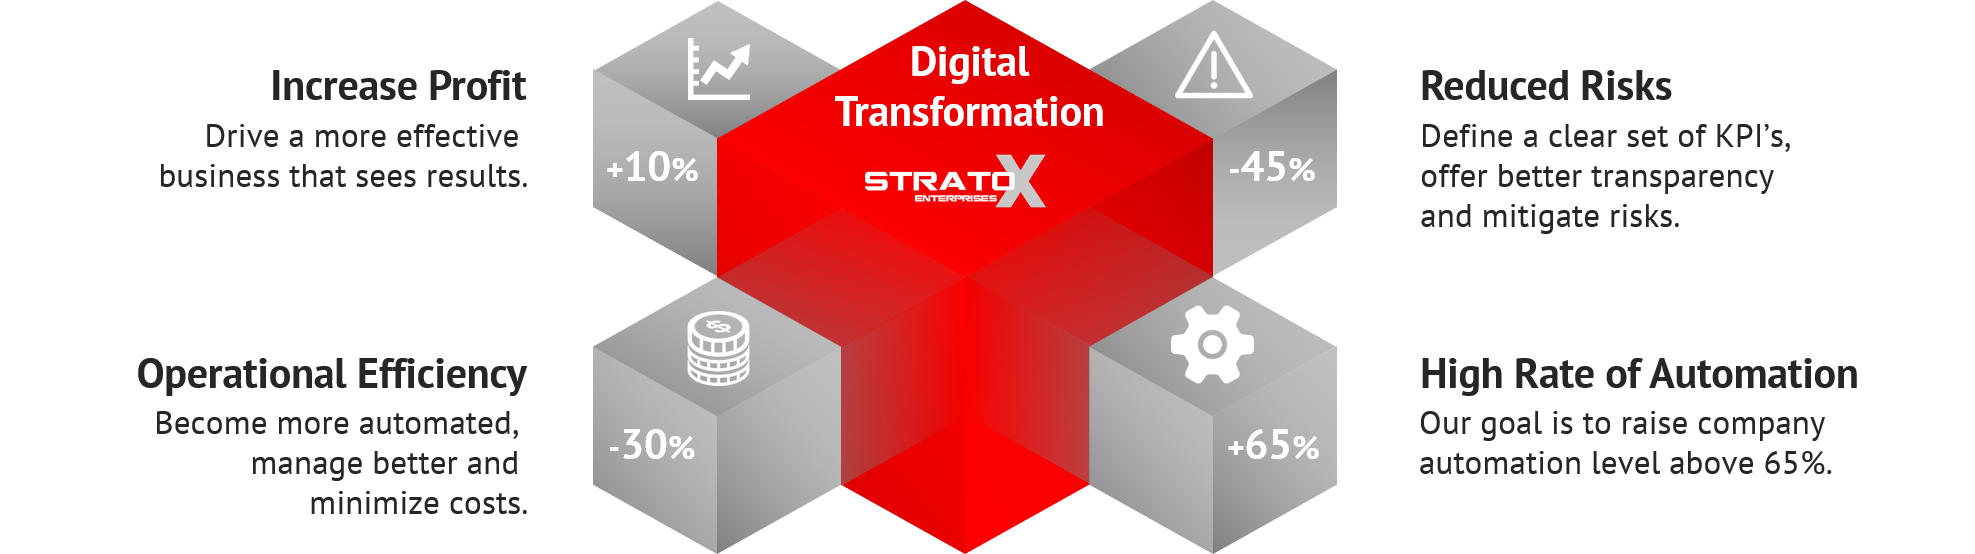 Digital Transformation- Higher Profit, Lower Risks, Lower Operational Cost, High Automation Rate and Adoption